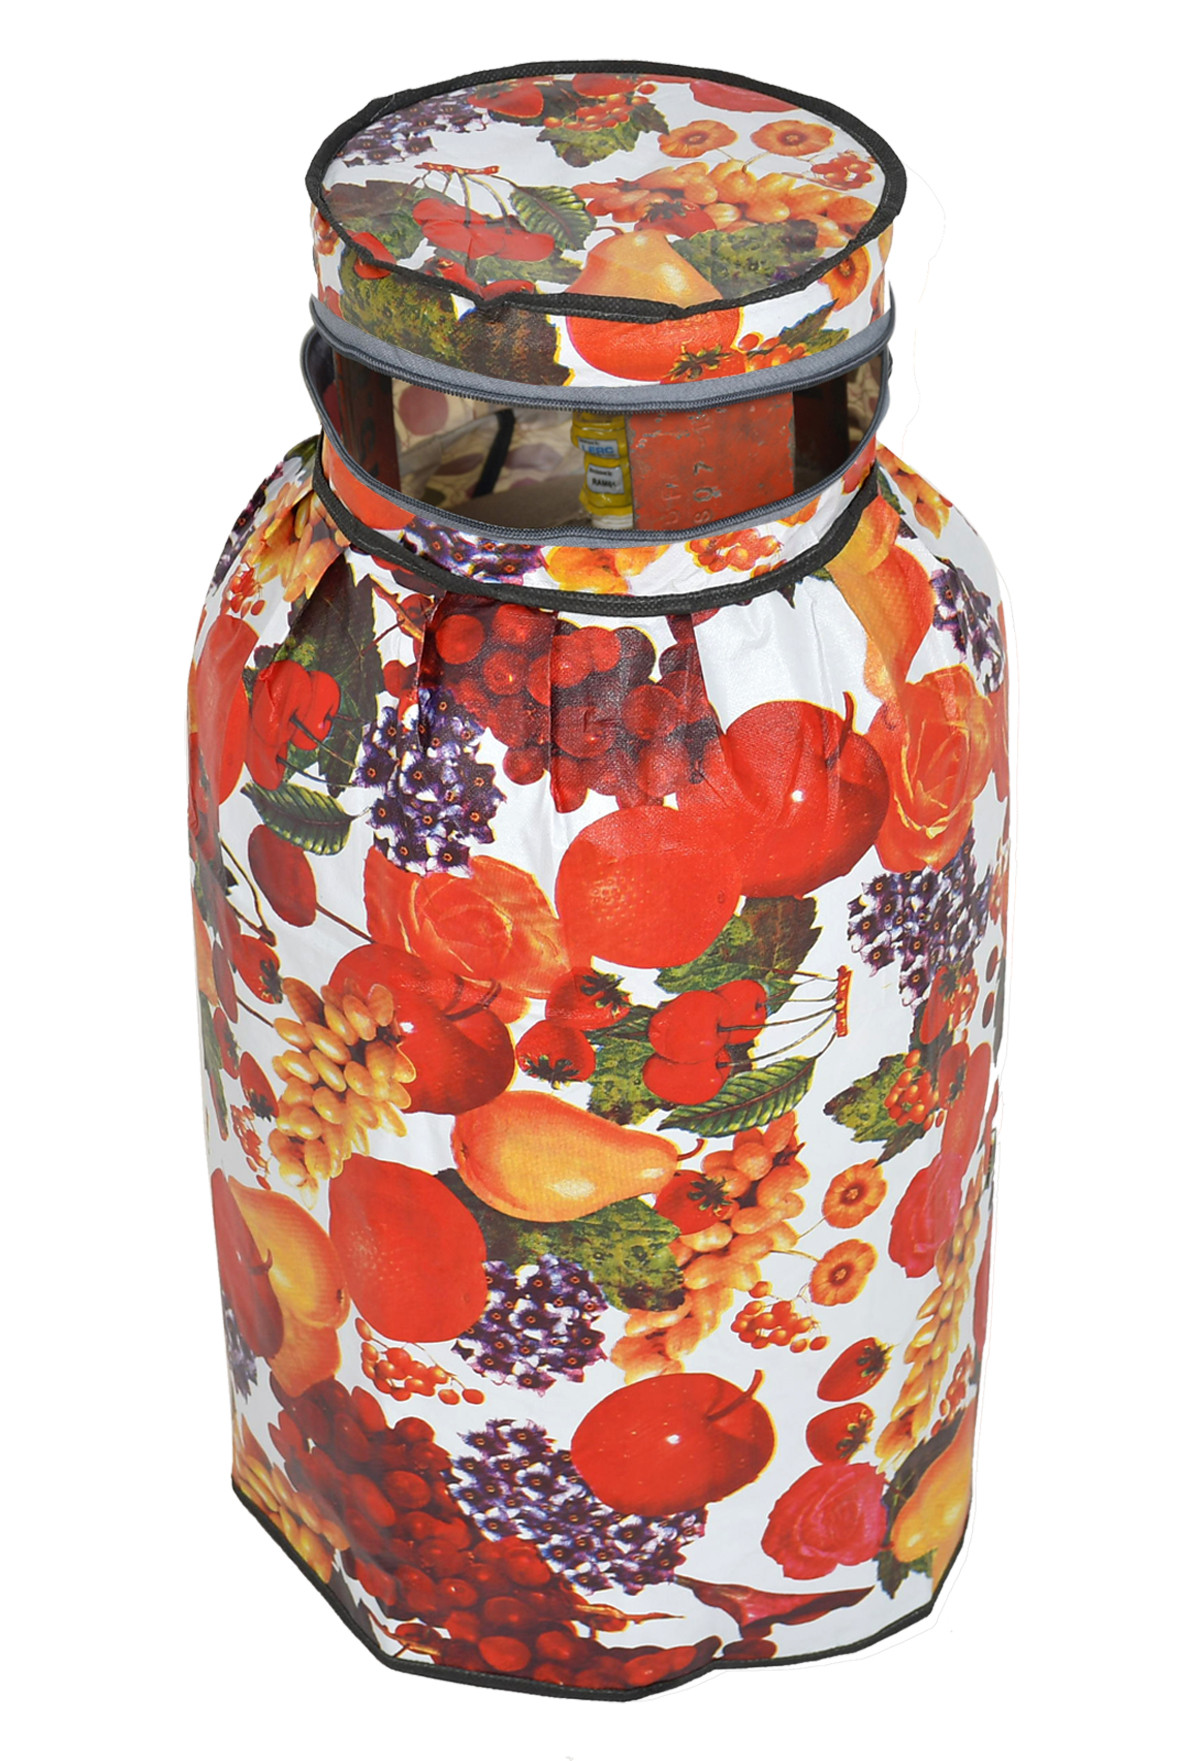 Kuber Industries Fruit Printed Stain/Dust/Water Proof PVC Lpg Gas Cylinder Cover (Multicolour)-HS43KUBMART25618